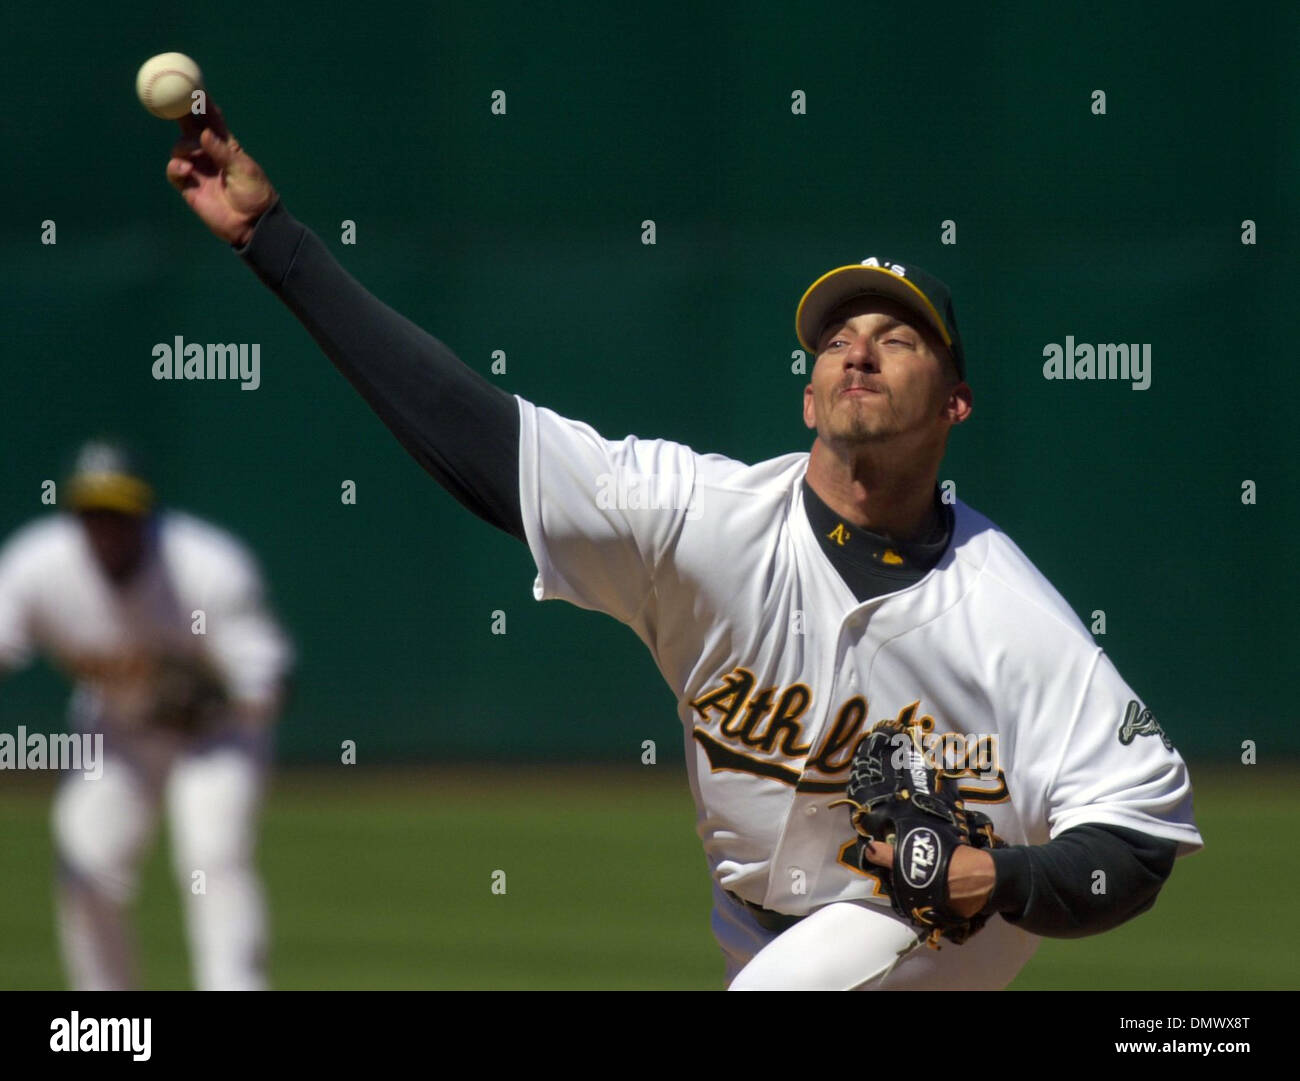 Apr 18, 2002; Oakland, CA, USA; Oakland Athletics' pitcher Billy Koch, #44,  pitches against the Anaheim Angels' in the eighth inning of their game on  Thursday, April 18, 2002 at Network Associates